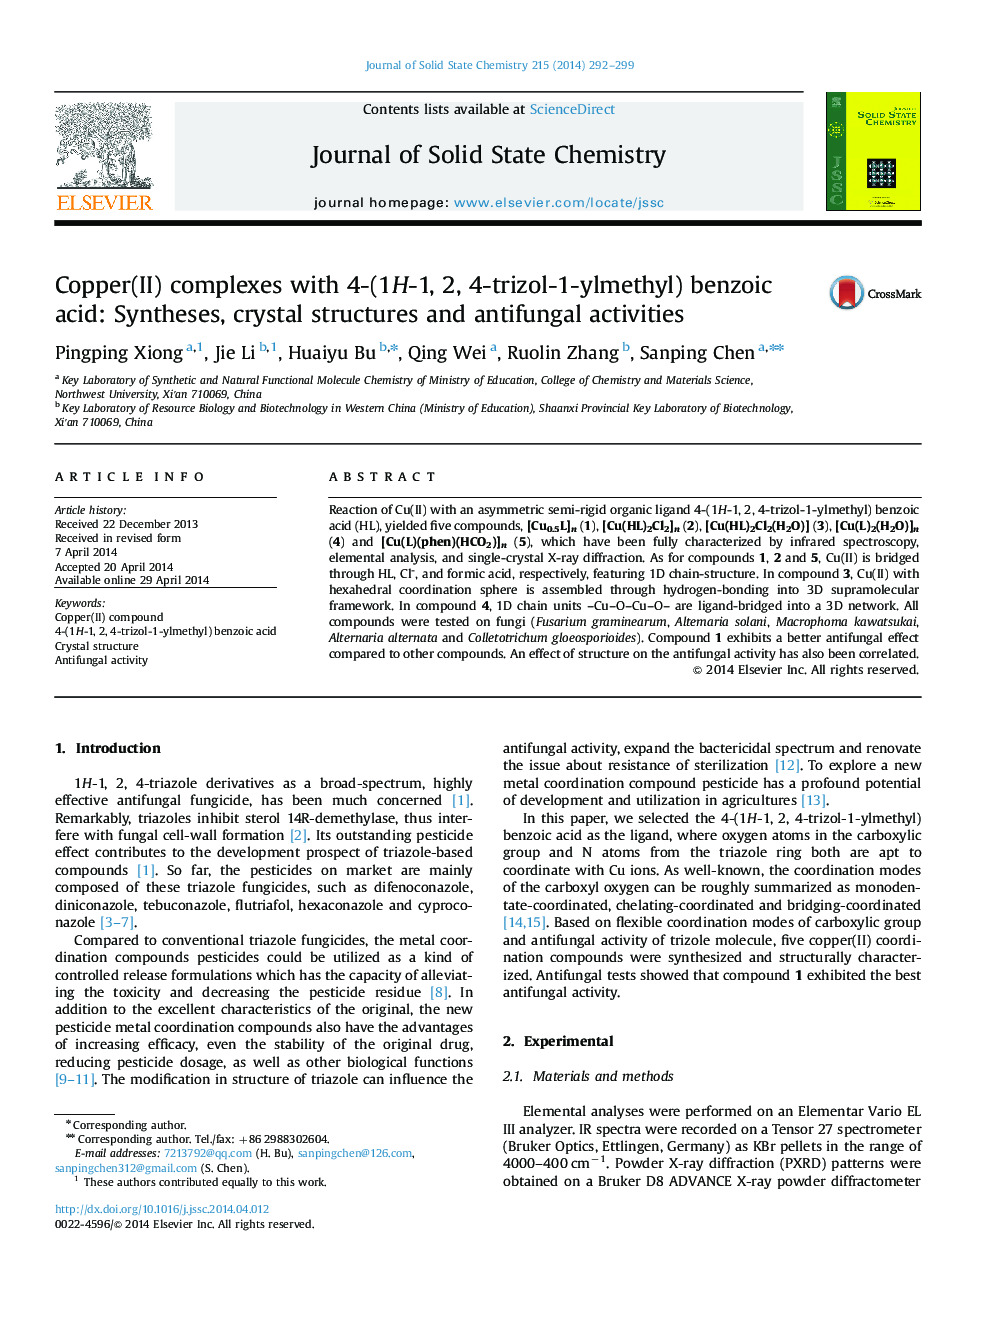 Copper(II) complexes with 4-(1H-1, 2, 4-trizol-1-ylmethyl) benzoic acid: Syntheses, crystal structures and antifungal activities